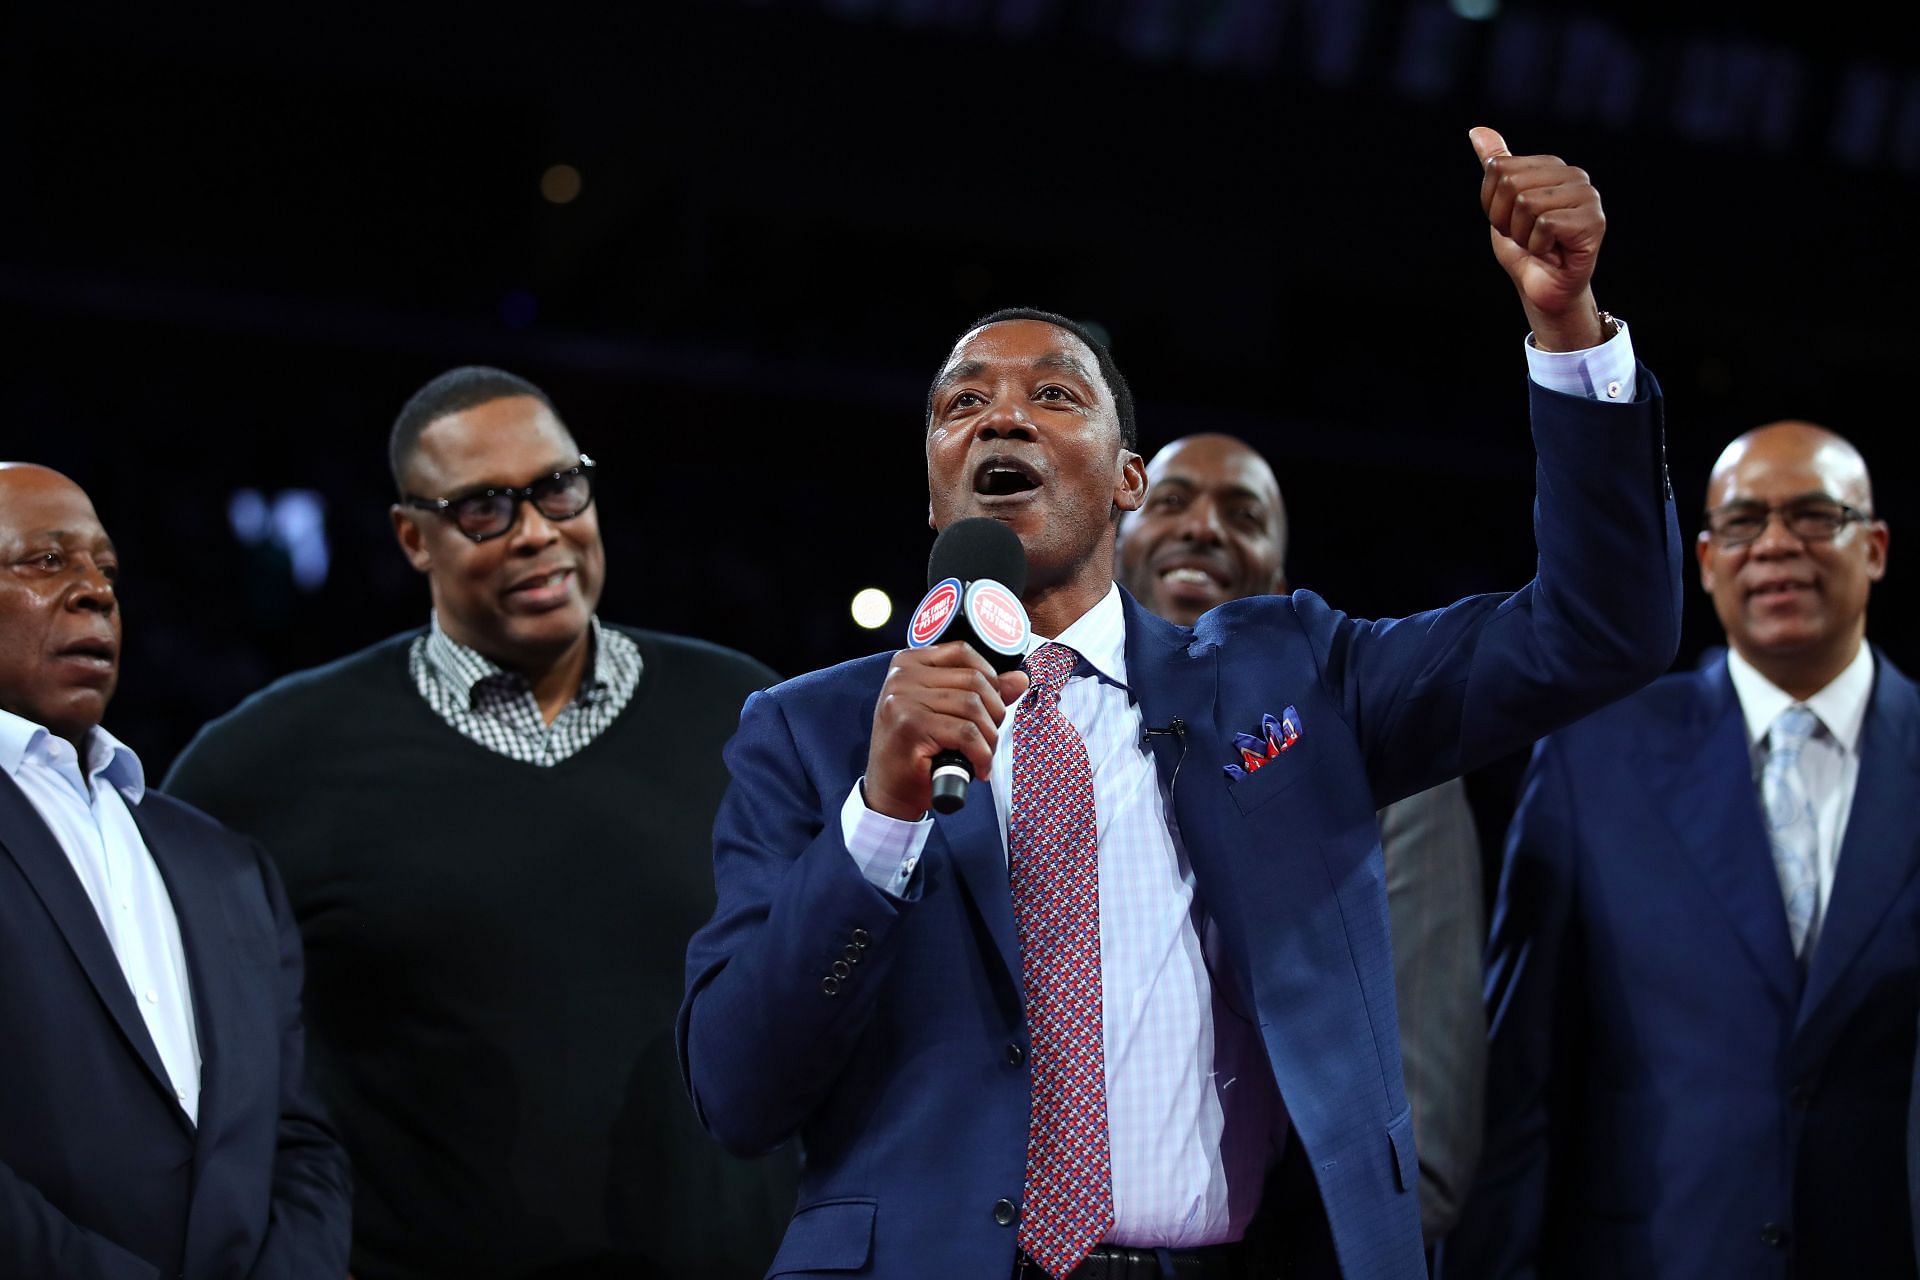 Hall of Famer and Detroit Pistons legend Isiah Thomas